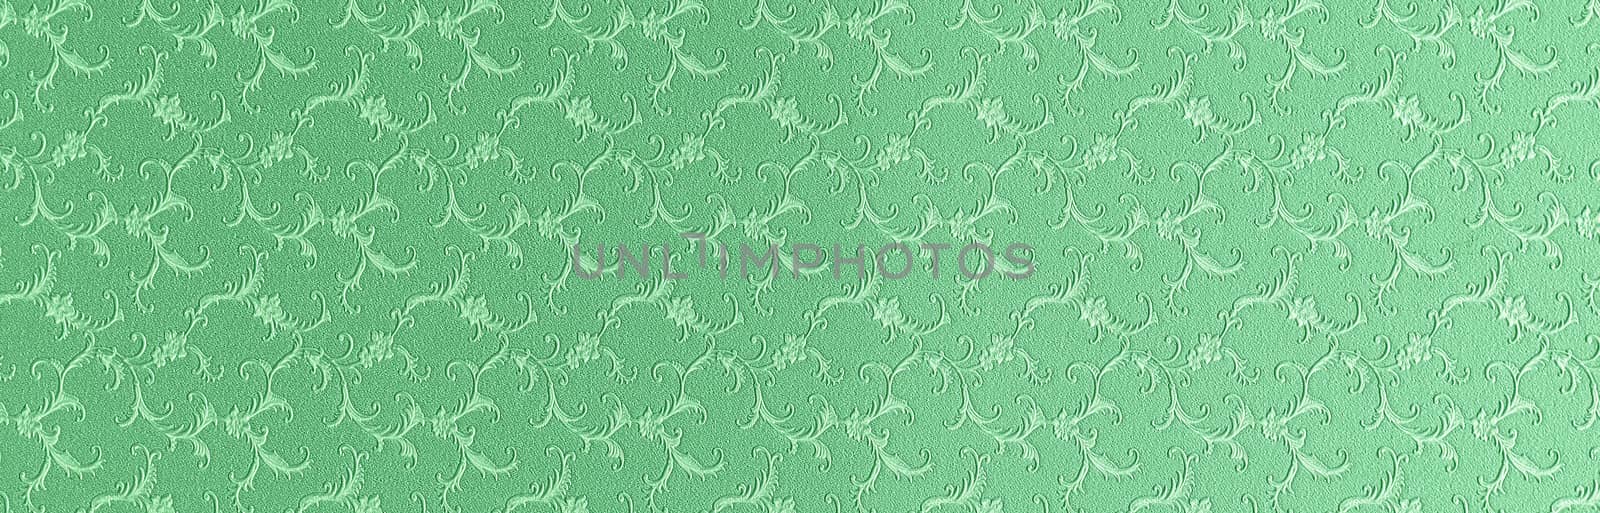 Embossed floral pattern on green paper. Textured paper with copy space. Light green, the color of fresh grass, paper surface, texture closeup.